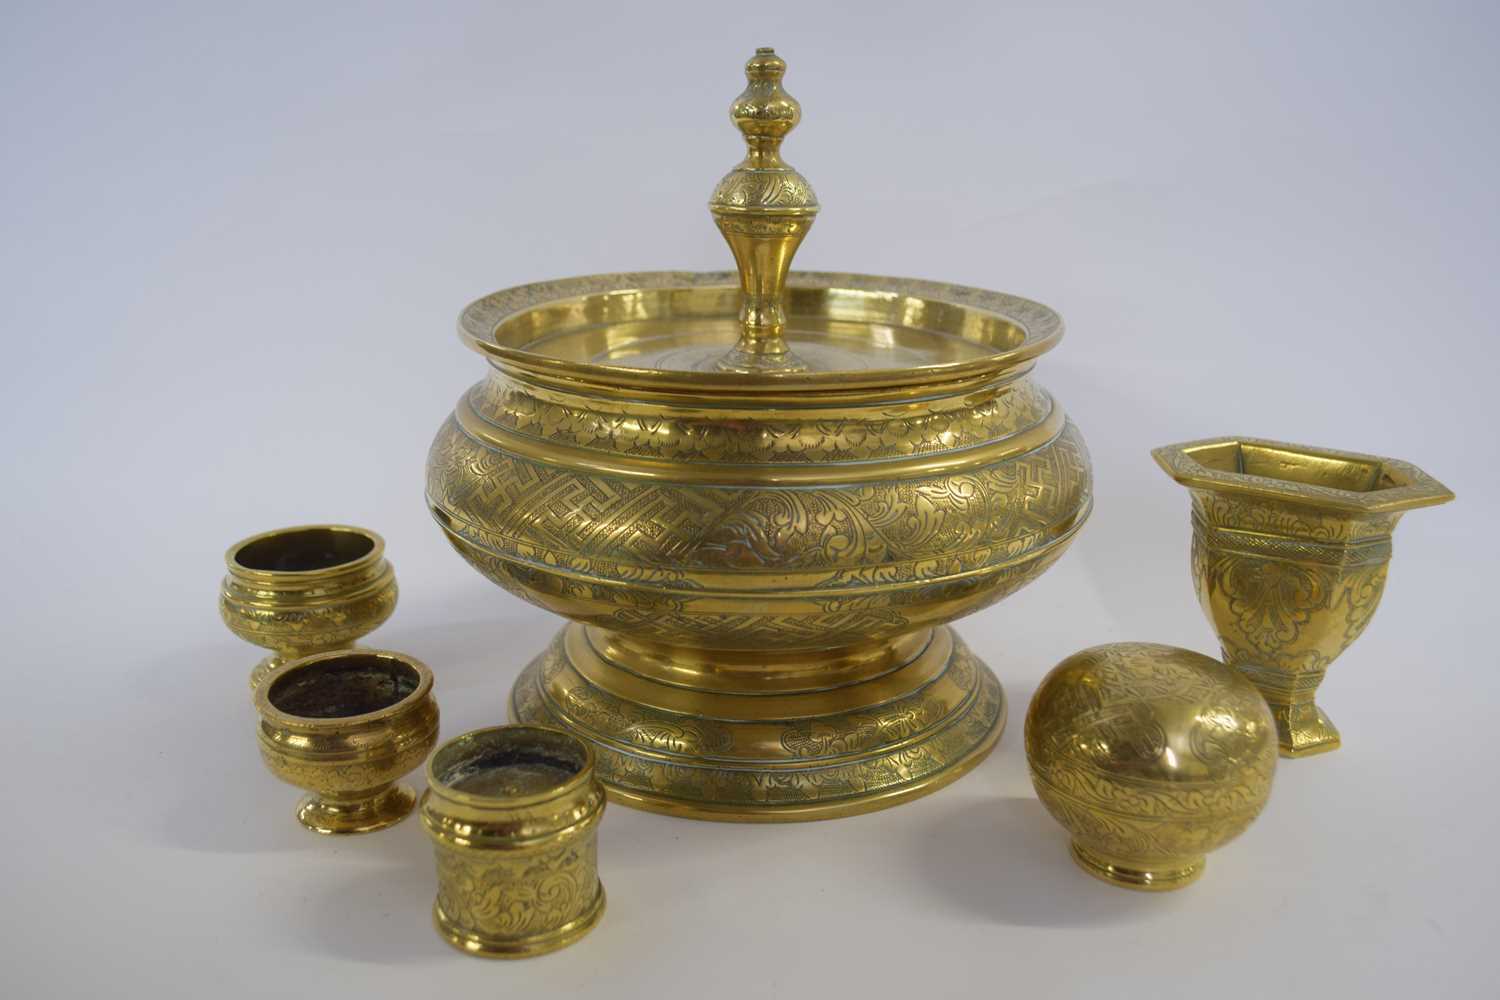 Balinese spice set comprising a large brass container and cover and other smaller implements